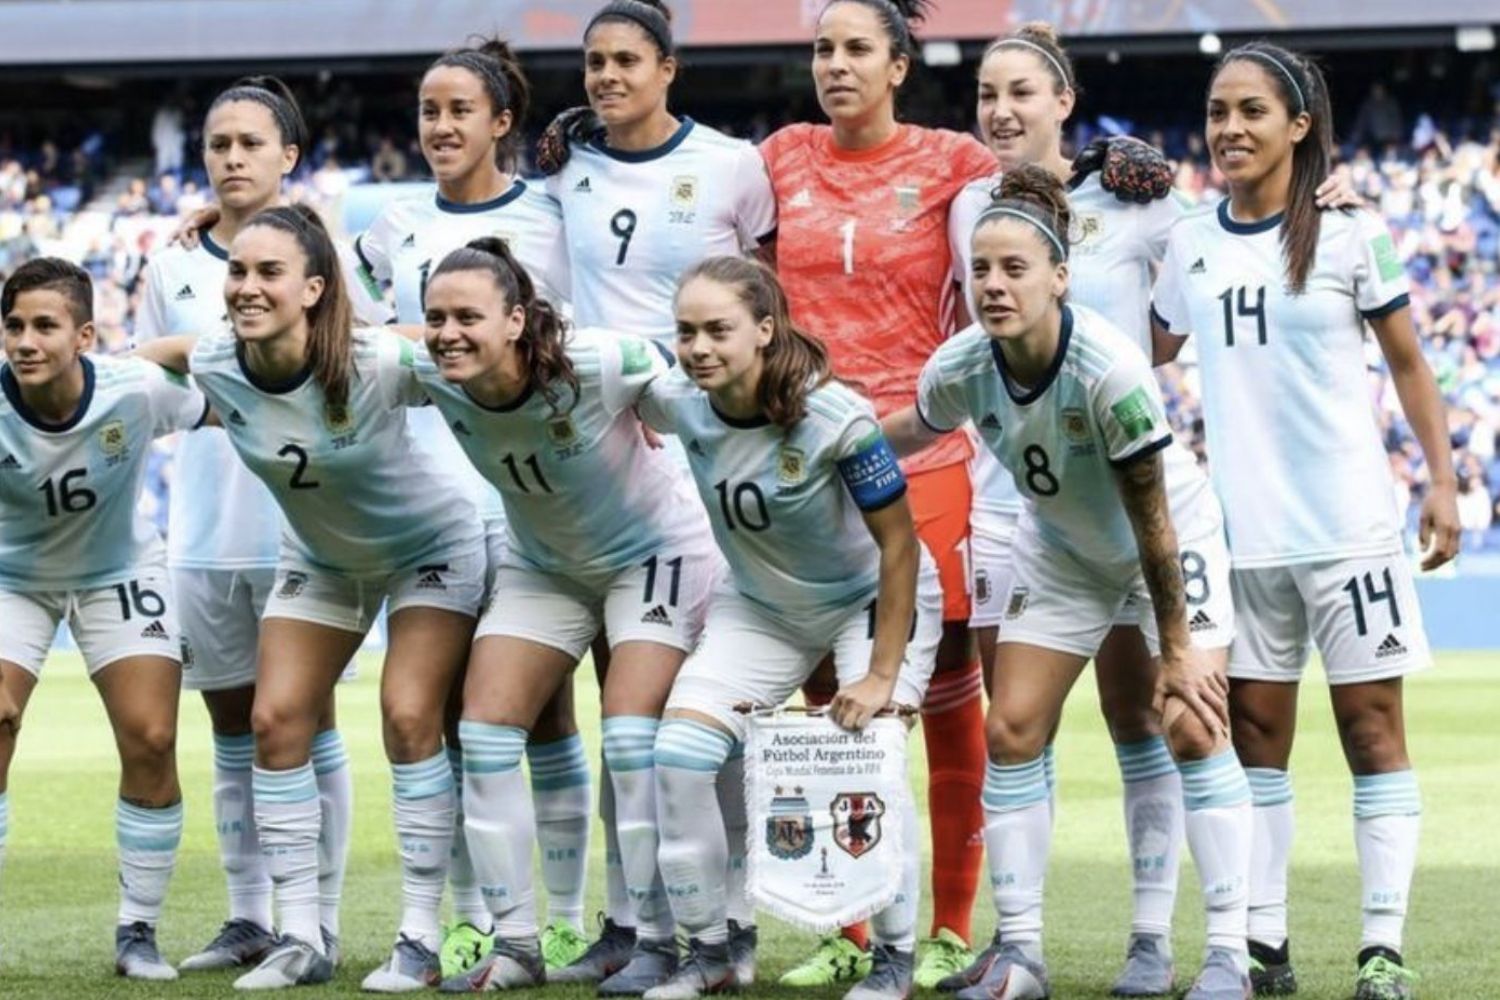 Argentina hopes to win its first WWC